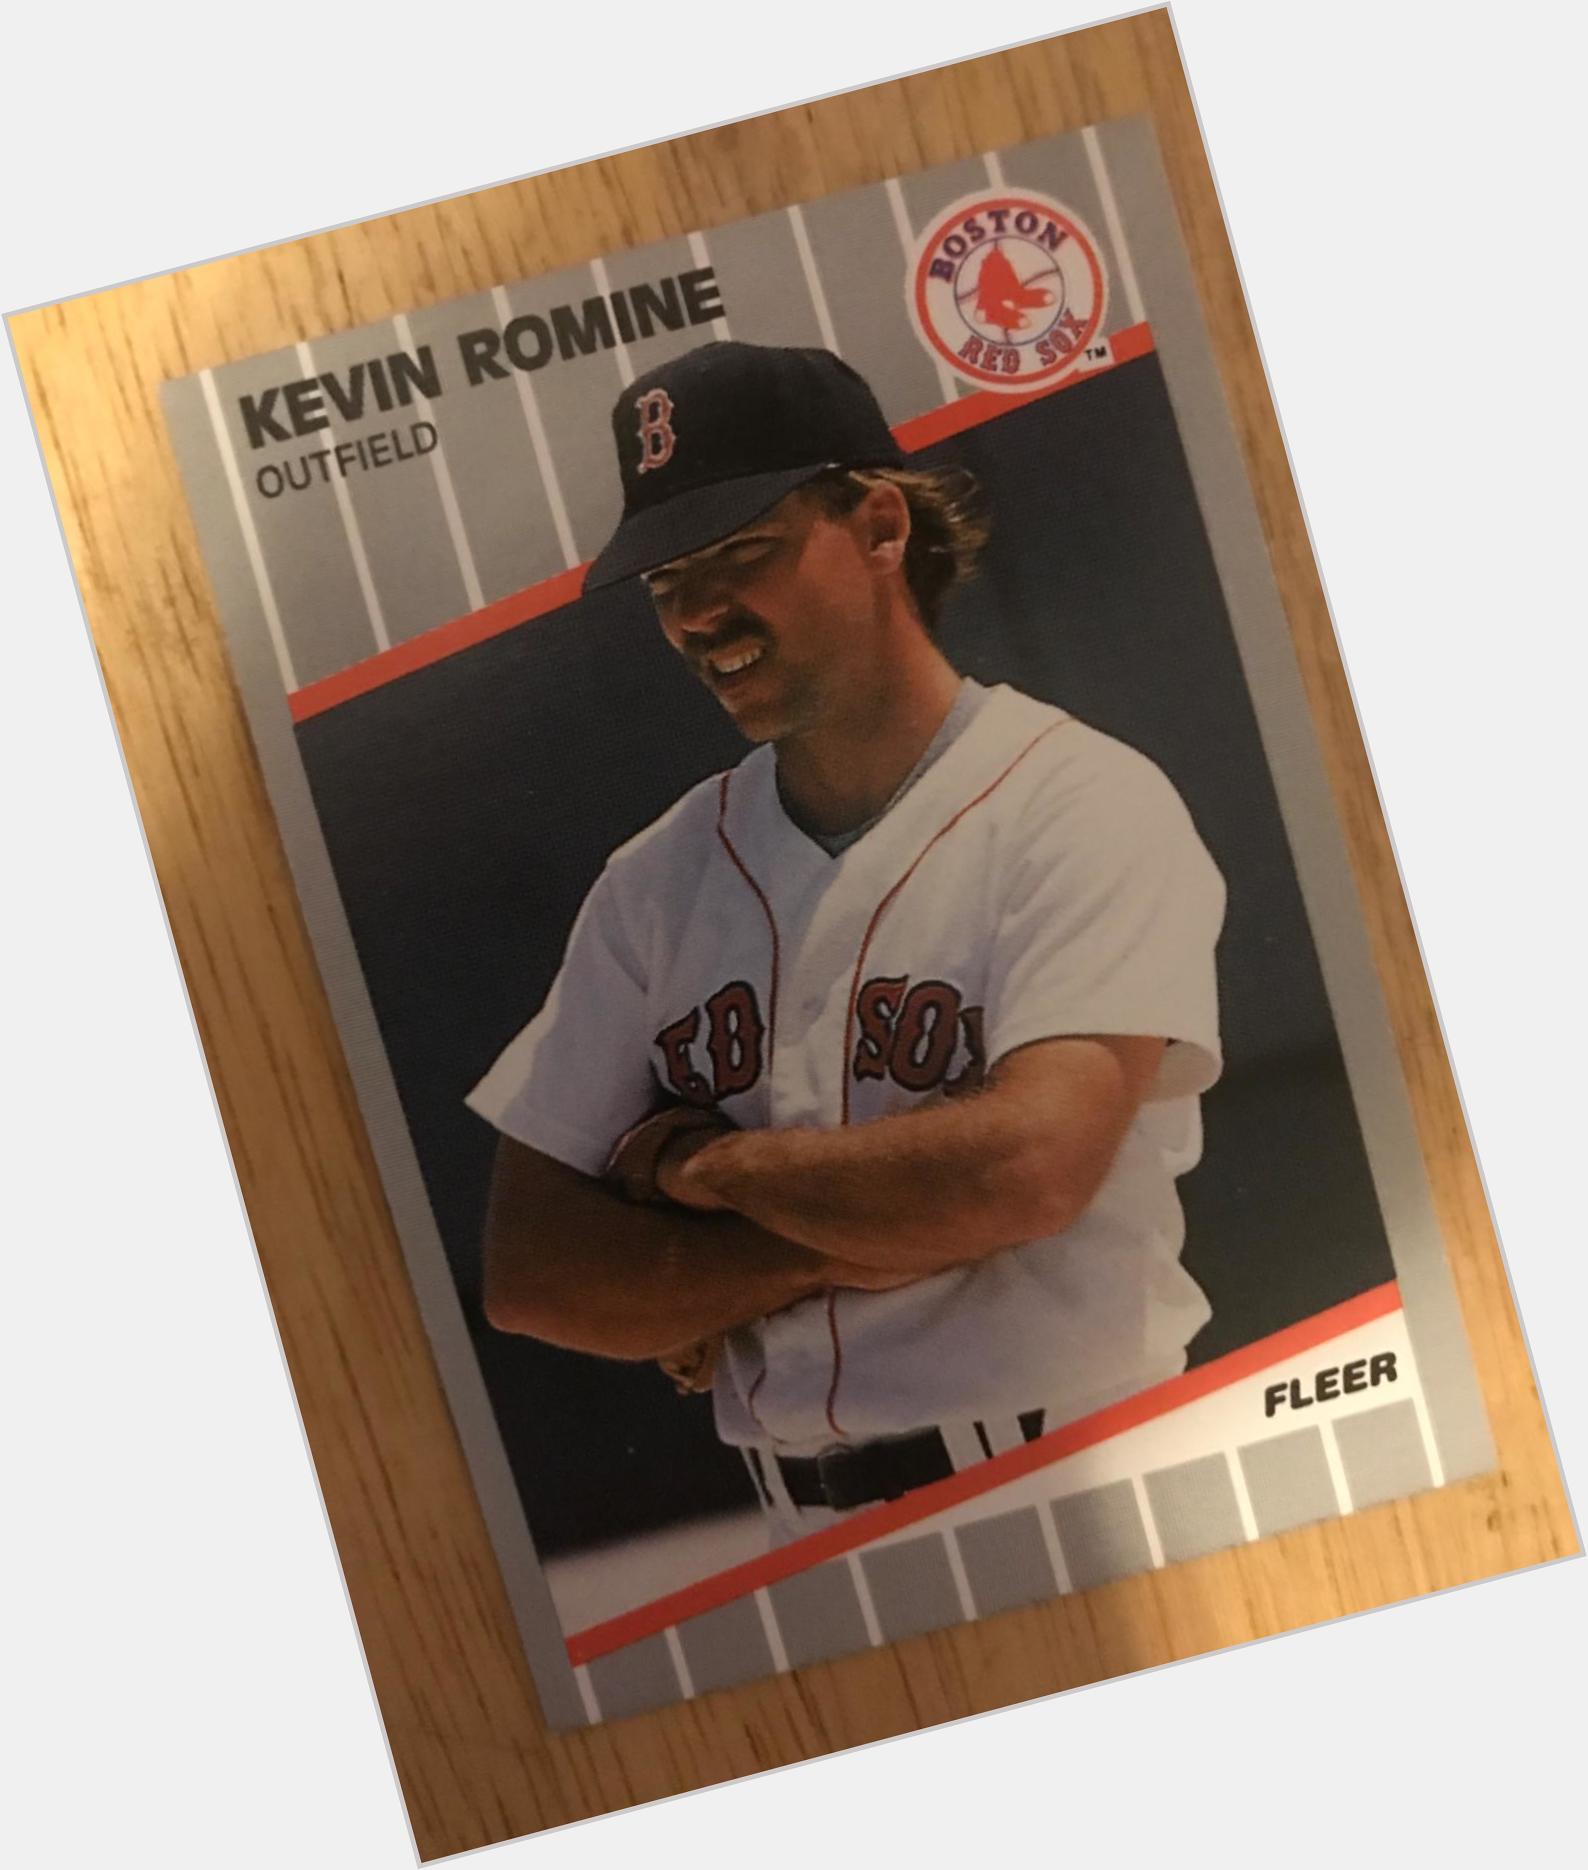 Kevin Romine  